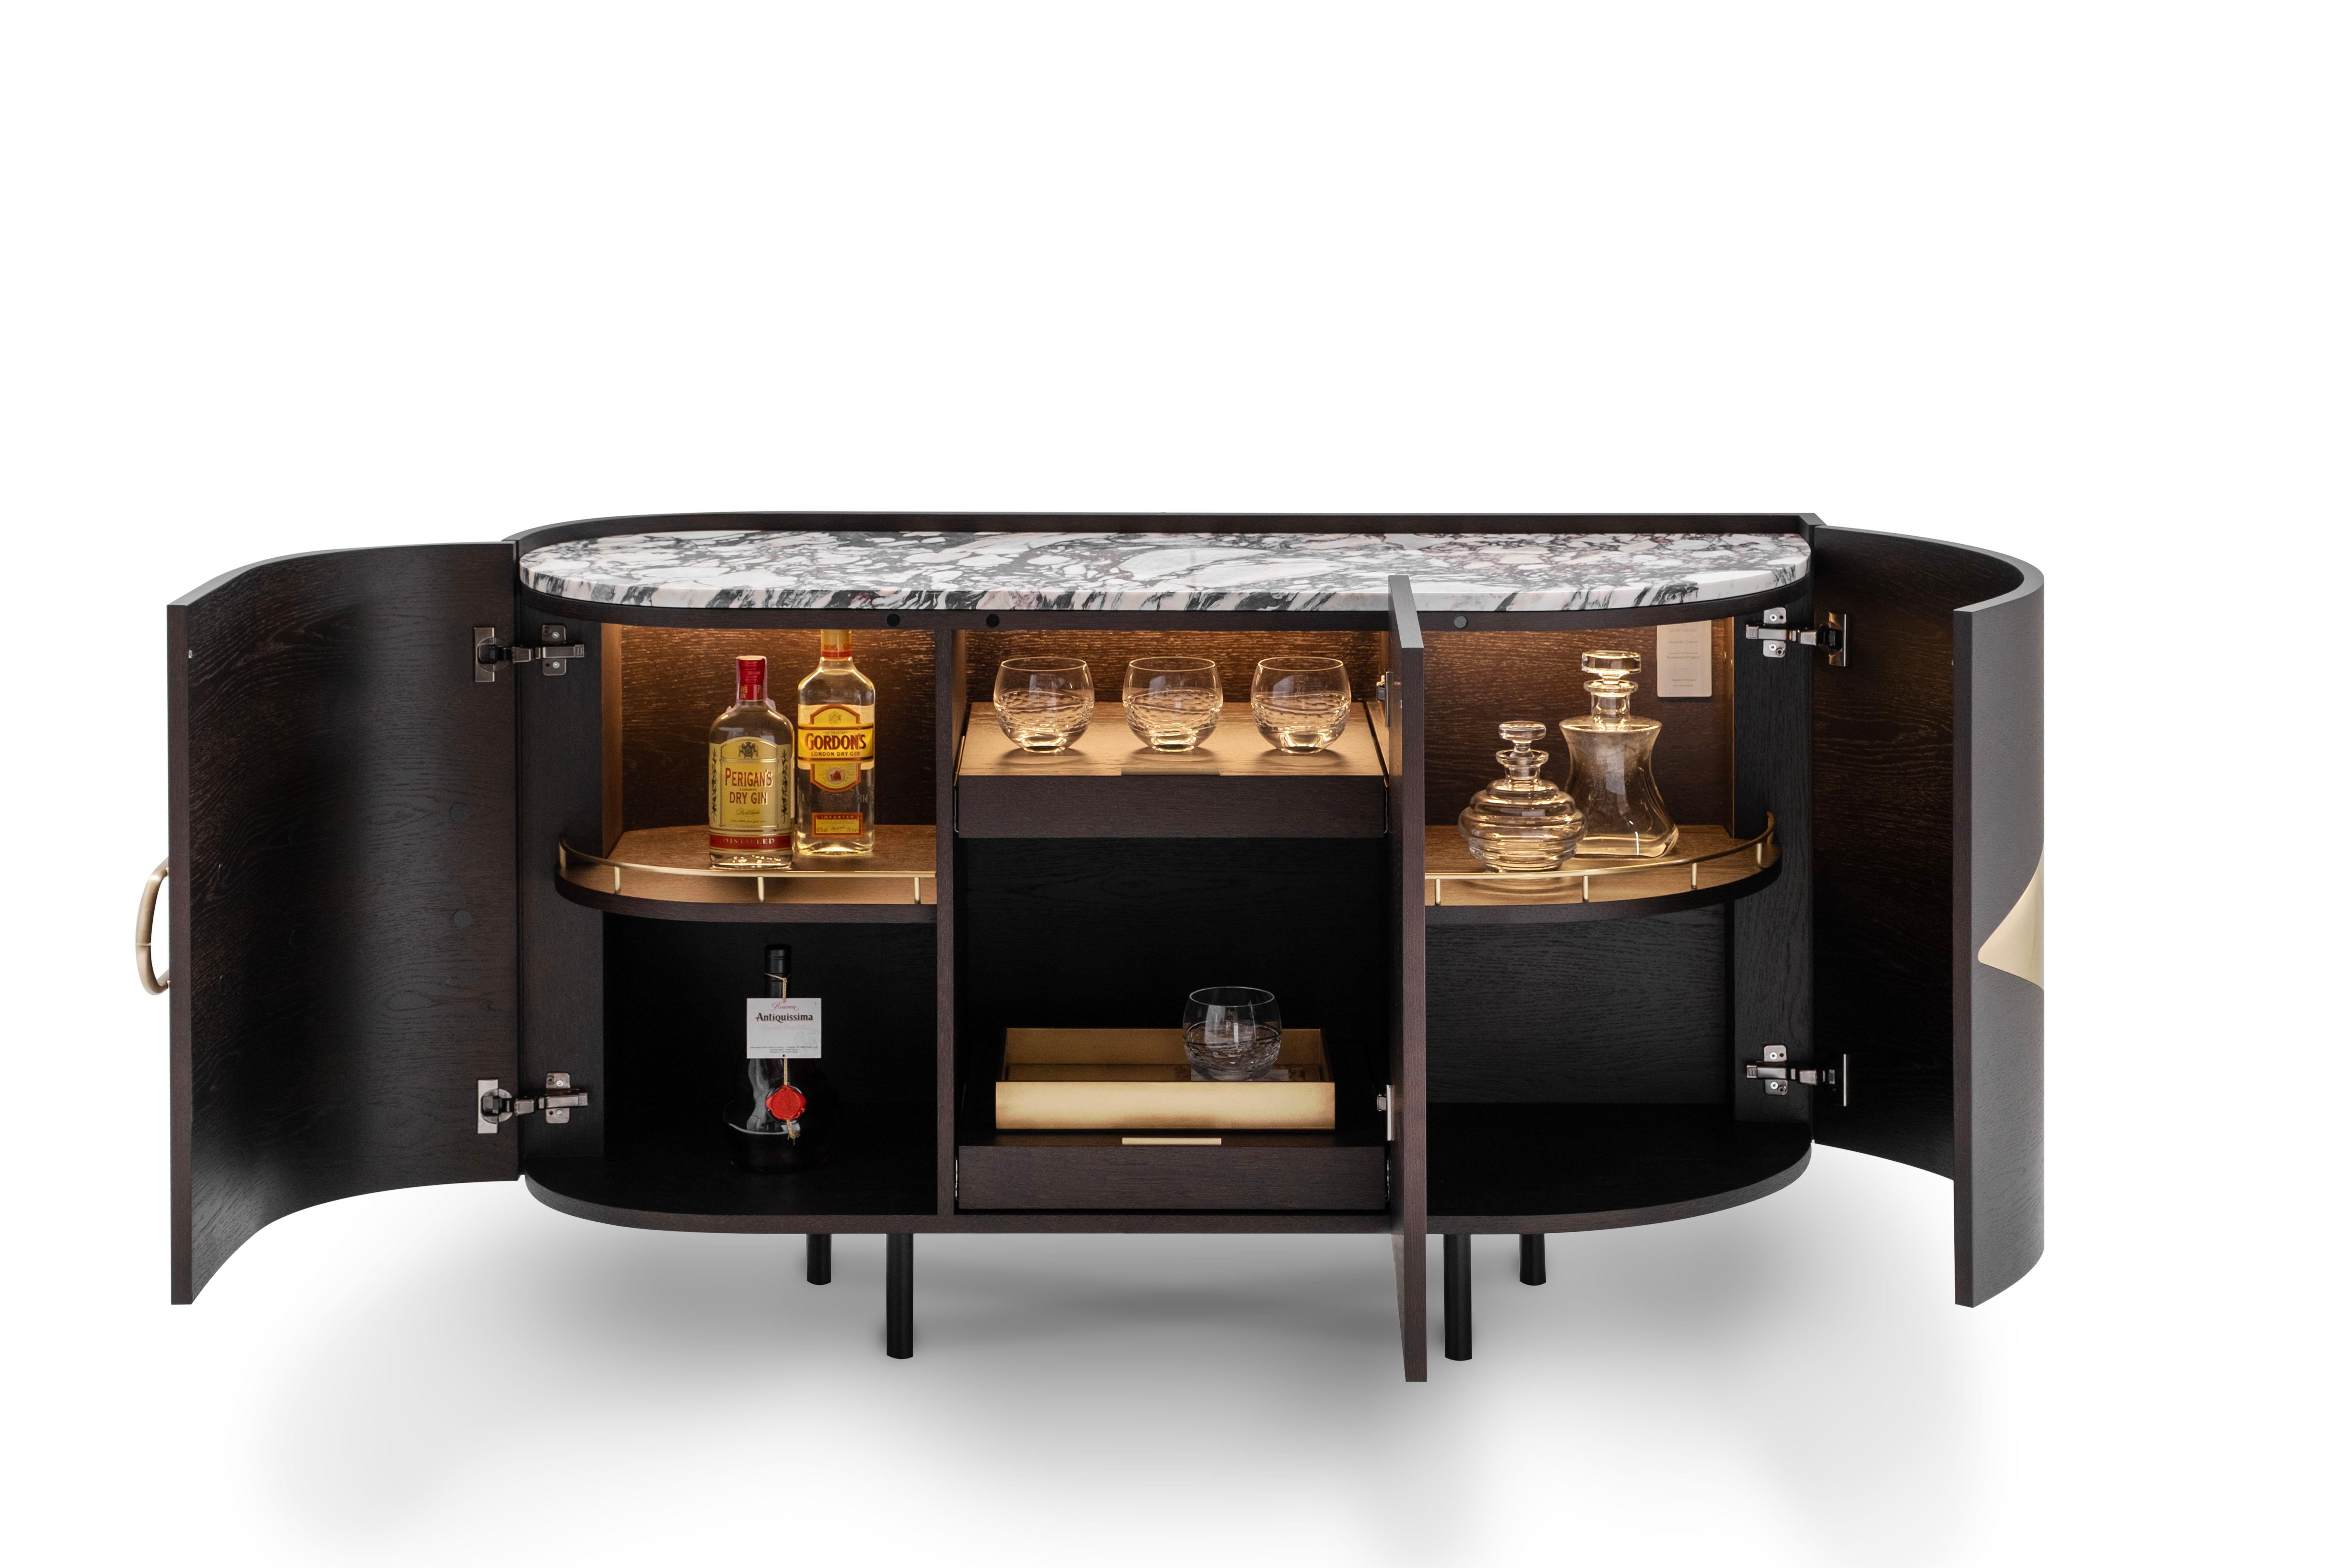 Olival Sideboard, Contemporary Collection, Handcrafted in Portugal - Europe by Greenapple.

Designed by Rute Martins for the Contemporary Collection, the Olival modern cocktail cabinet is inspired by the sacred symbolism of the ancient Greek olive